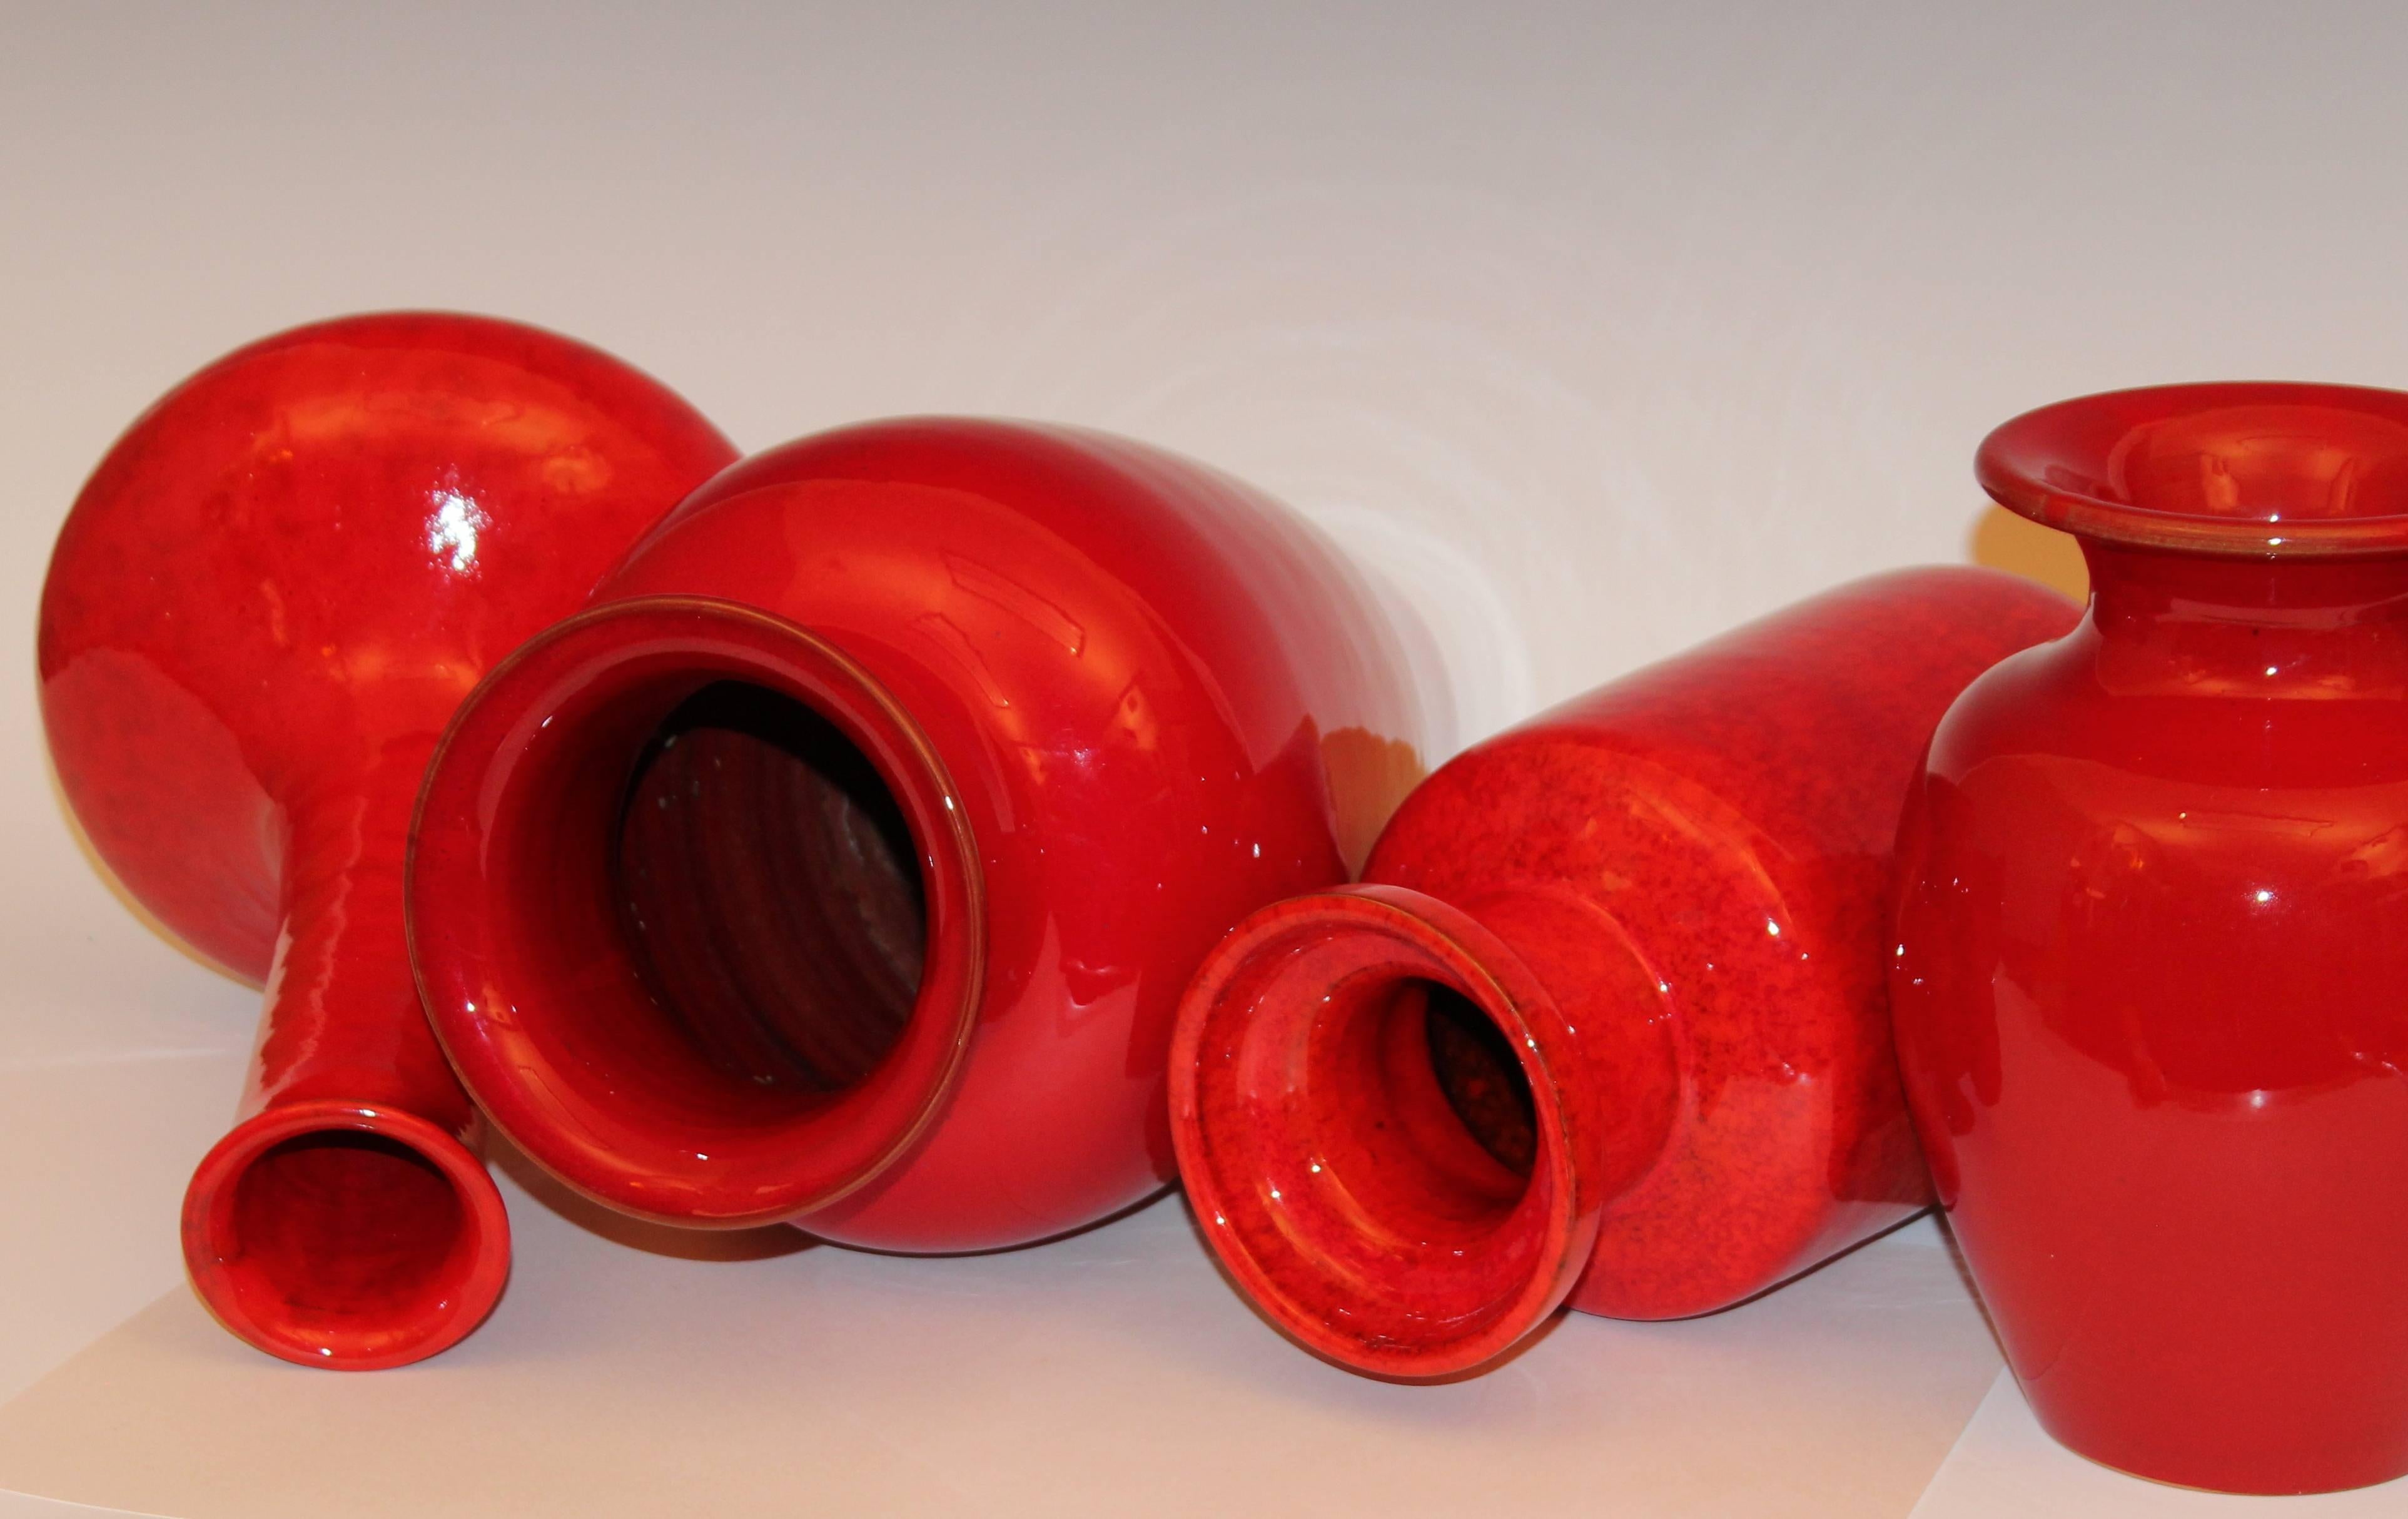 Mid-20th Century Collection Vintage Italian Pottery Vases in Atomic Red Glaze